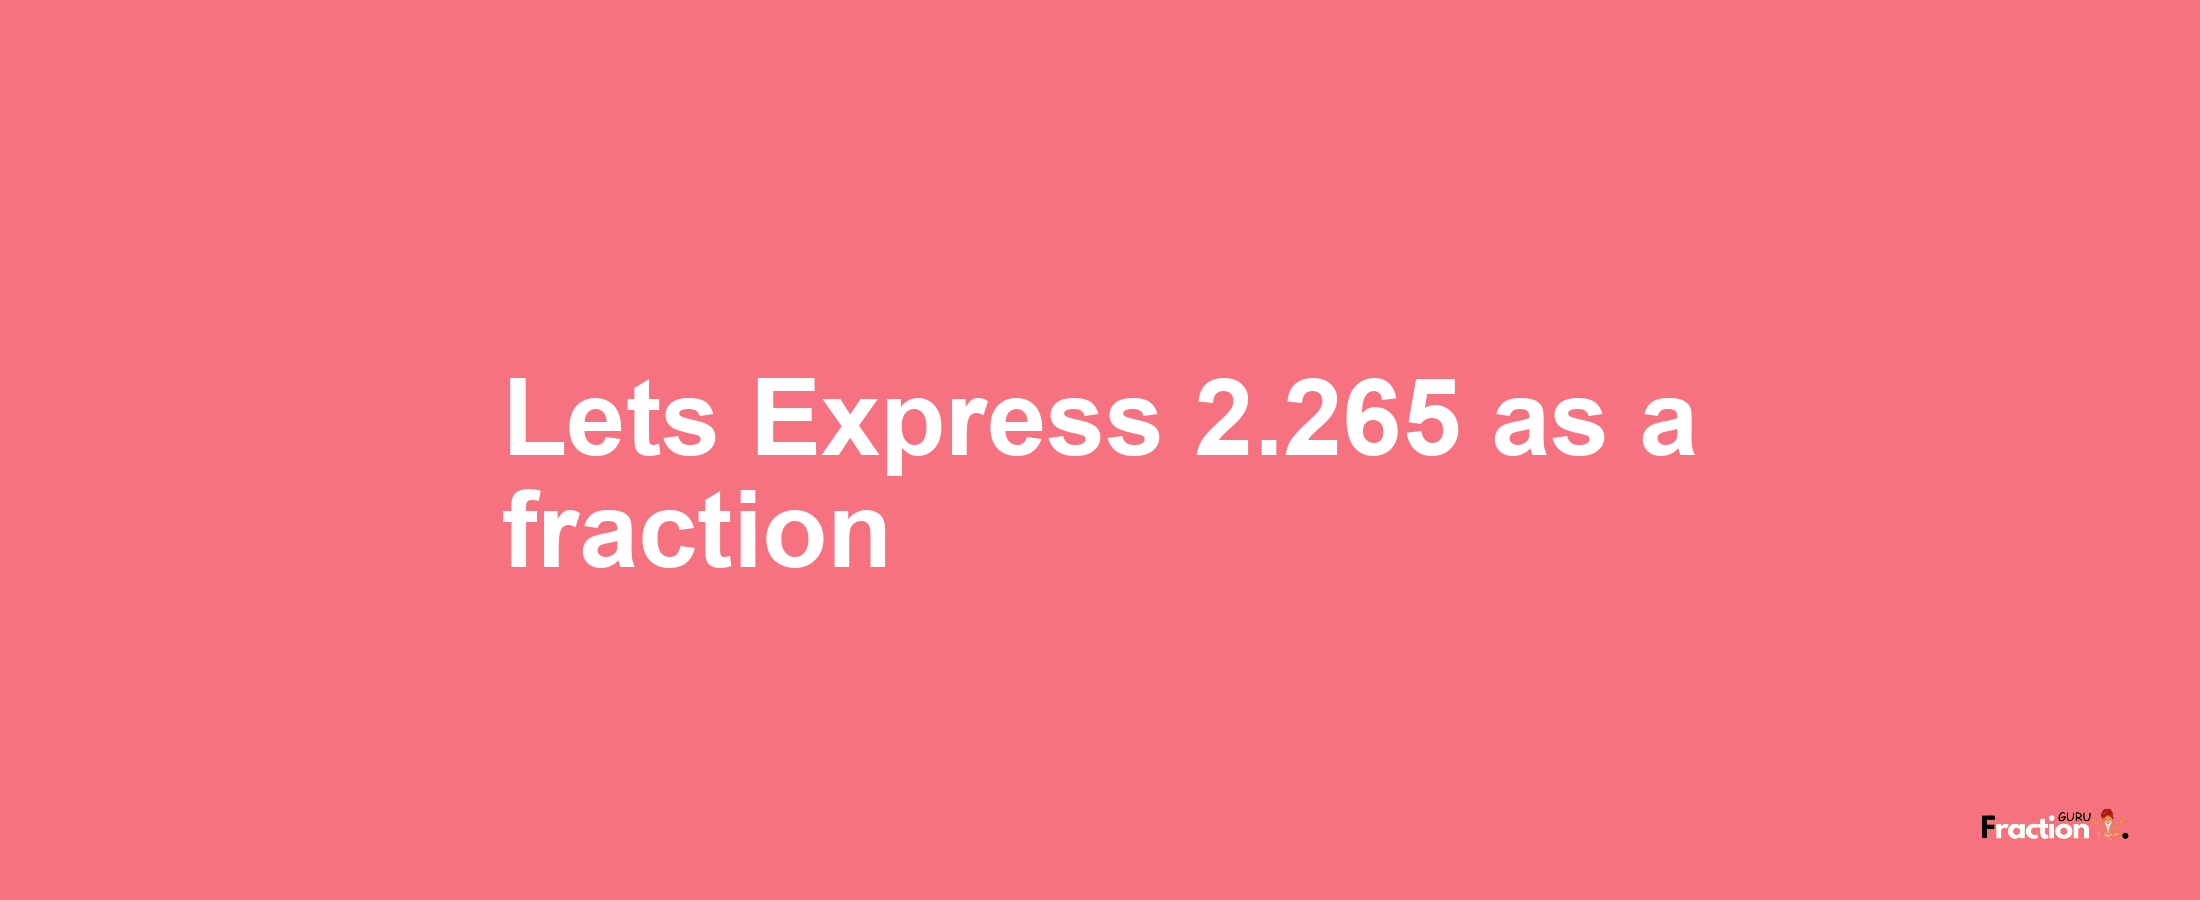 Lets Express 2.265 as afraction